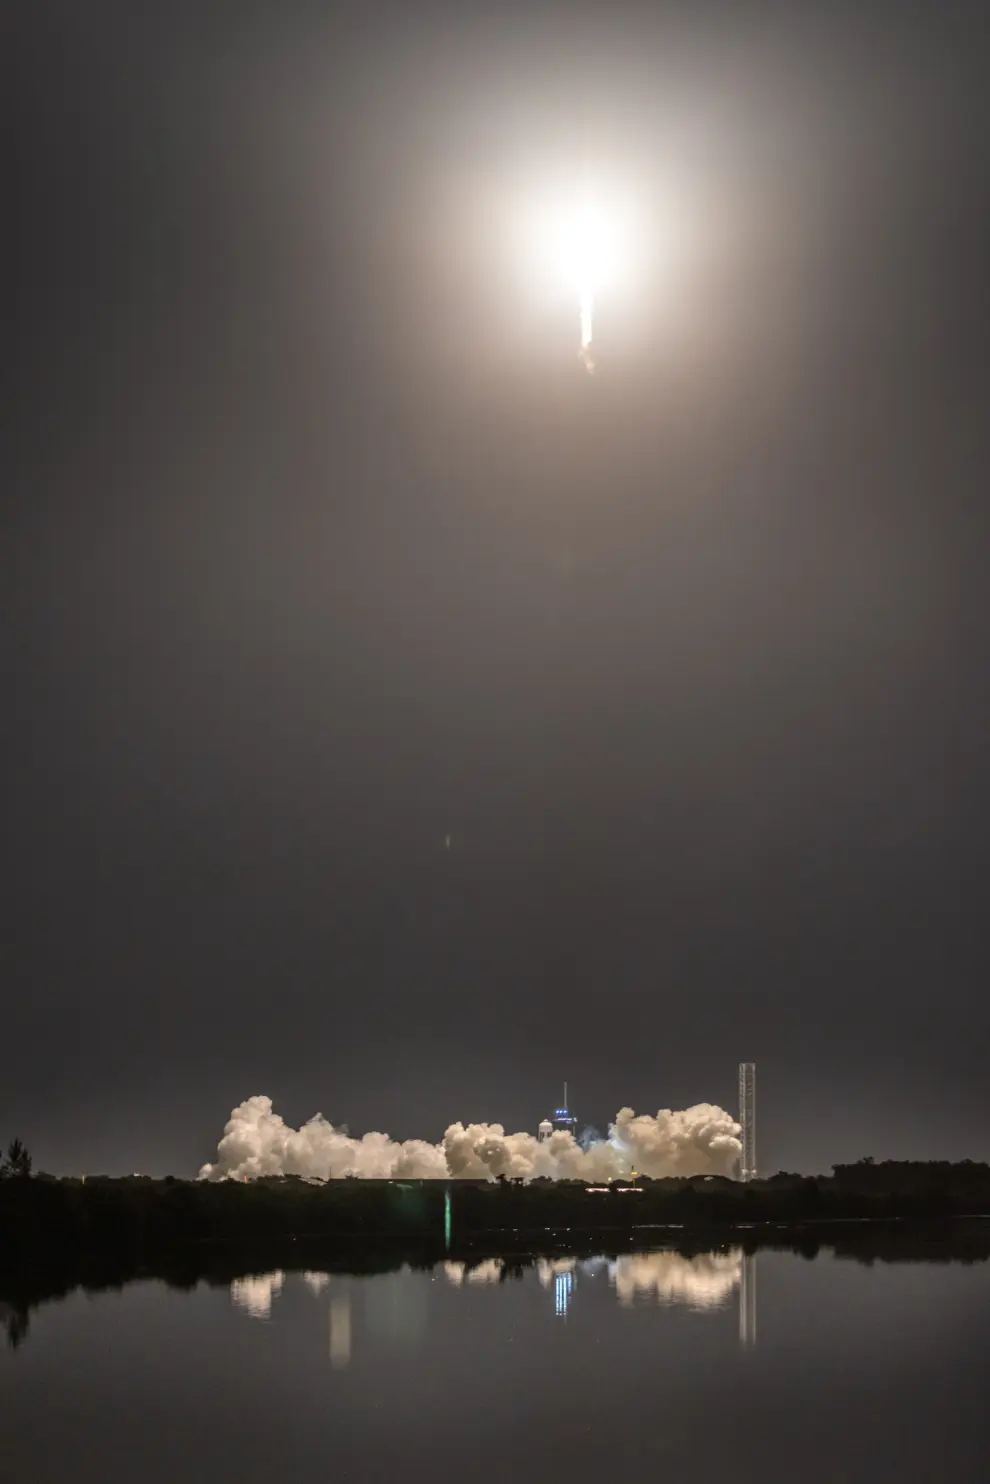 Titusville (Usa), 26/08/2023.- The SpaceX Crew-7 mission lifts off on a Falcon 9 rocket from Launch Complex 39A at the Kennedy Space Center, Florida, USA, 26 August 2023. The Crew 7 mission members are Mission commander NASA astronaut Jasmin Moghbeli, Mission specialist Roscosmos cosmonaut Konstantin Borisov, Mission pilot ESA (European Space Agency) astronaut Andreas Mogensen, Mission specialist JAXA (Japan Aerospace Exploration Agency) astronaut Satoshi Furukawa. (Japón) EFE/EPA/CRISTOBAL HERRERA-ULASHKEVICH
